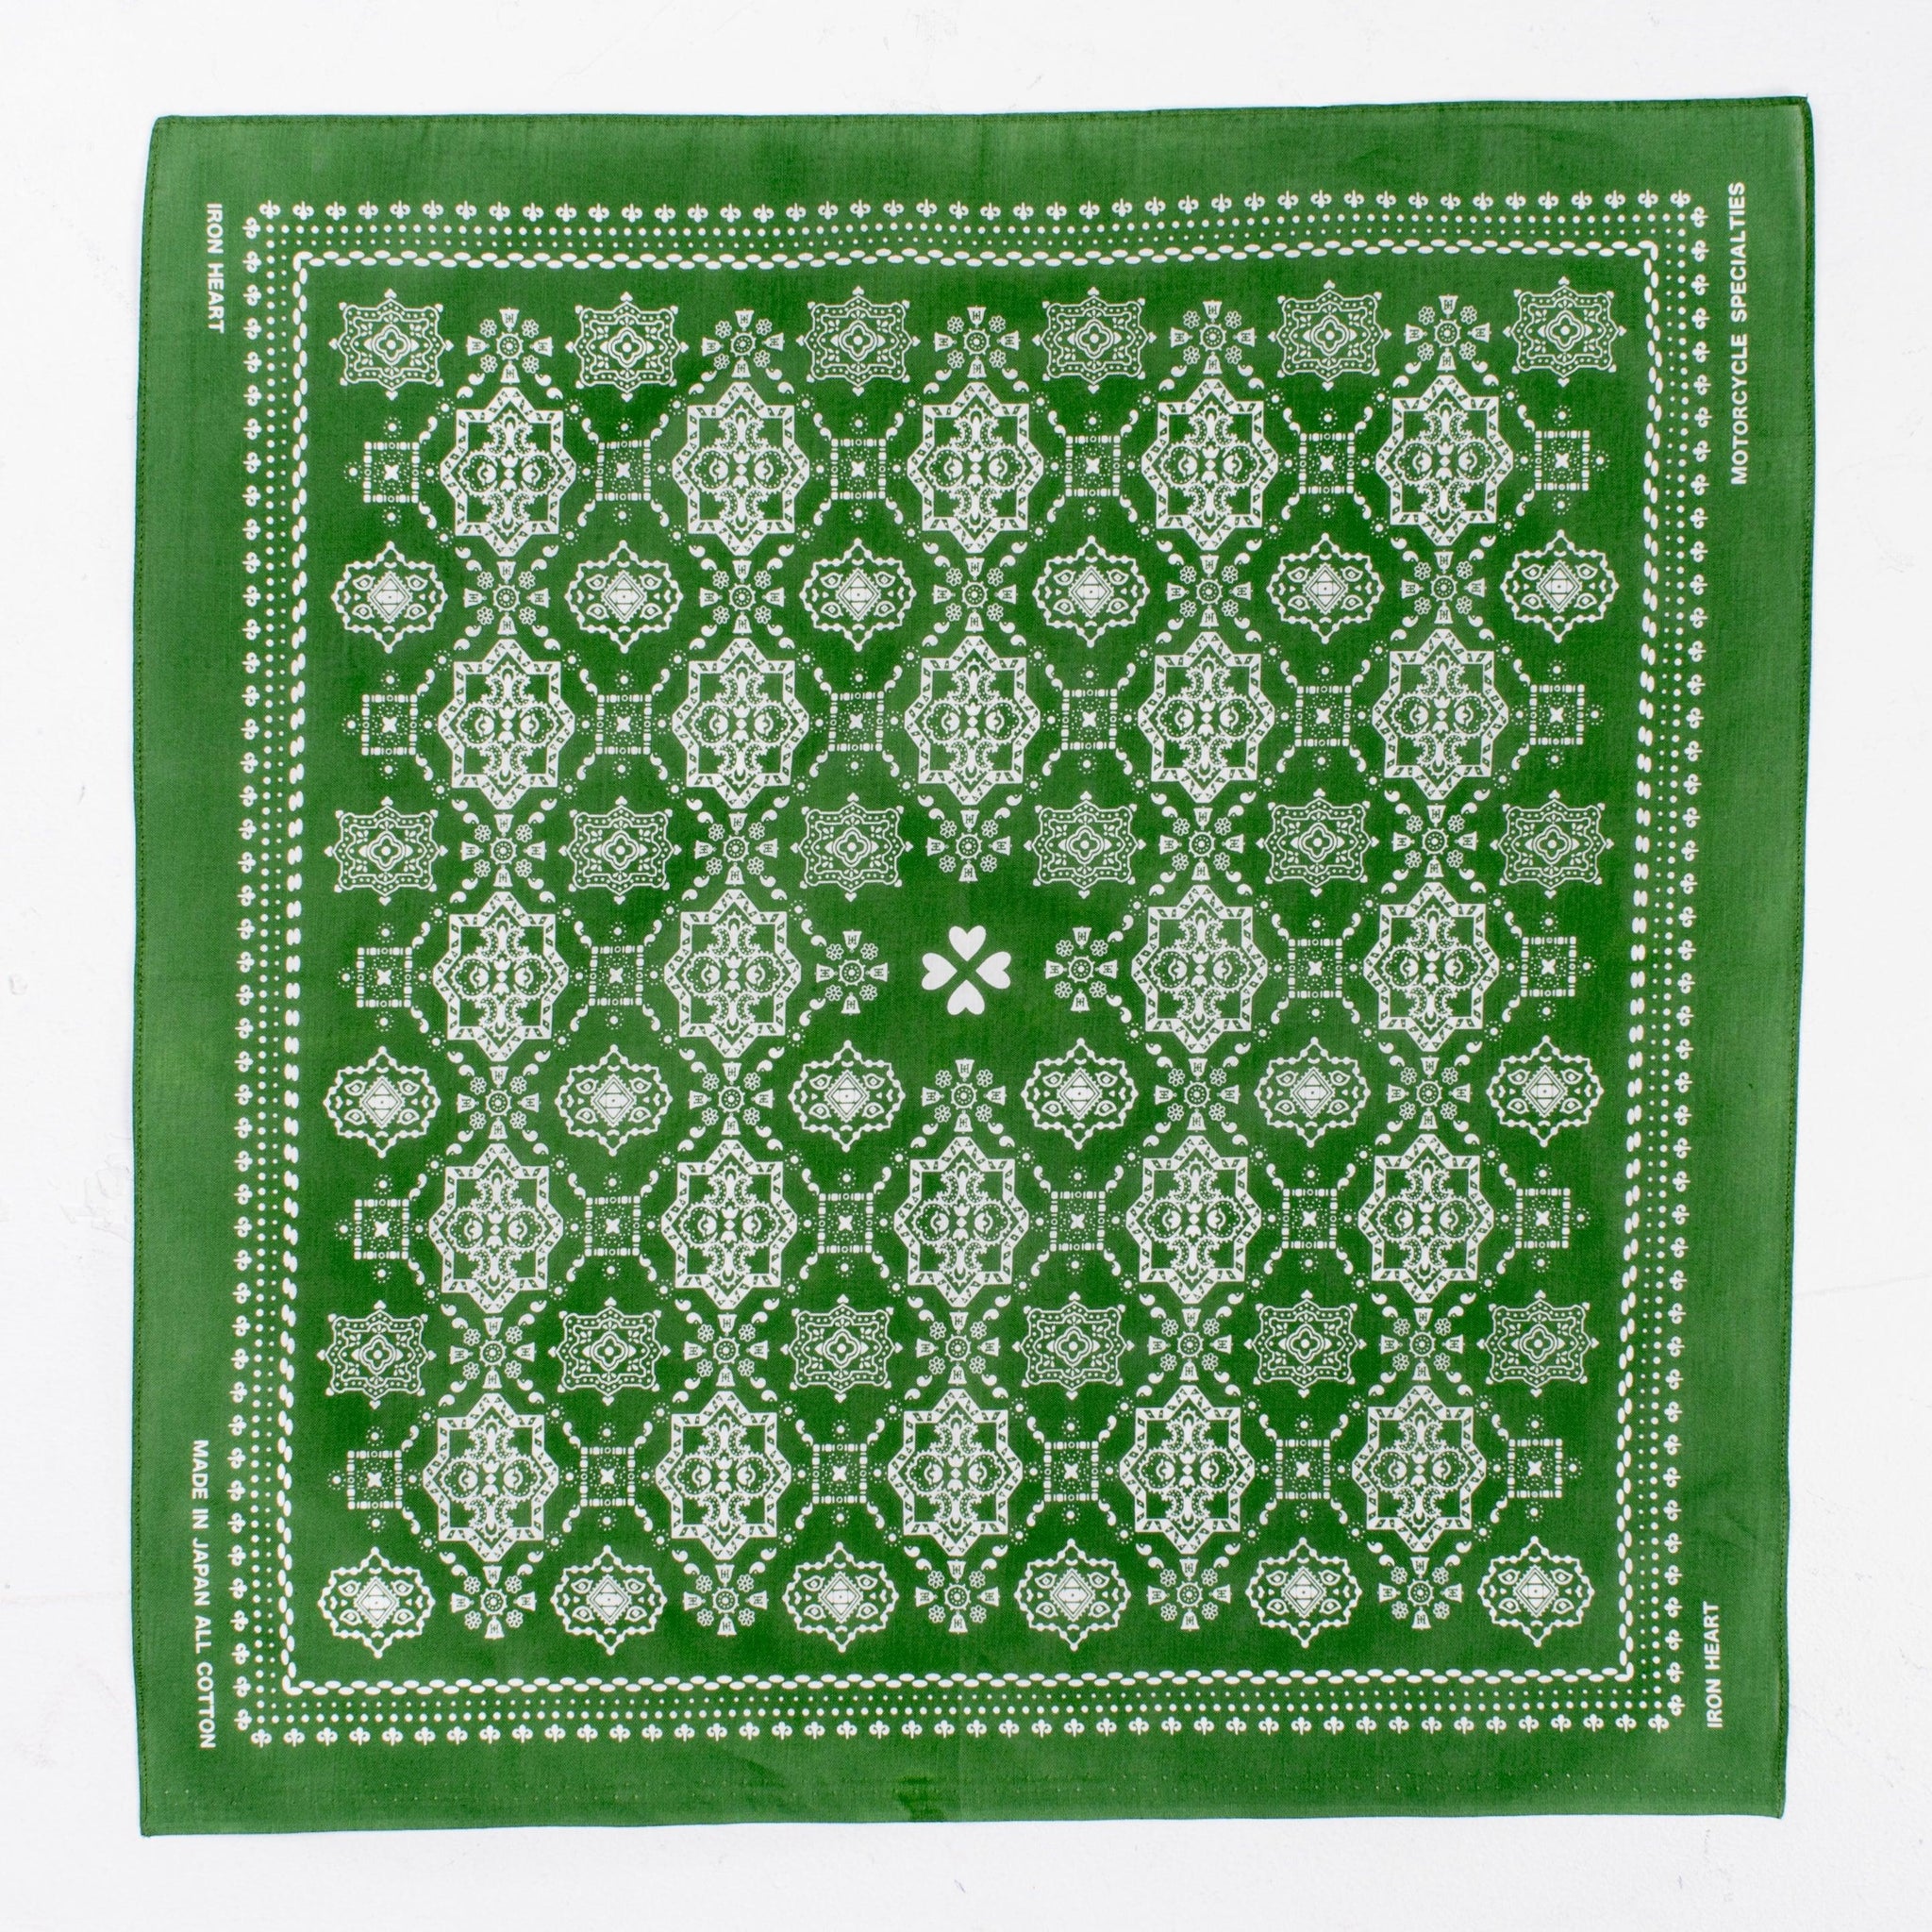 Image showing the IHG-051 - Iron Heart “Bell” Print Bandana - Black, Red, Green, Purple, Blue which is a Others described by the following info Accessories, Iron Heart, Others, Released and sold on the IRON HEART GERMANY online store